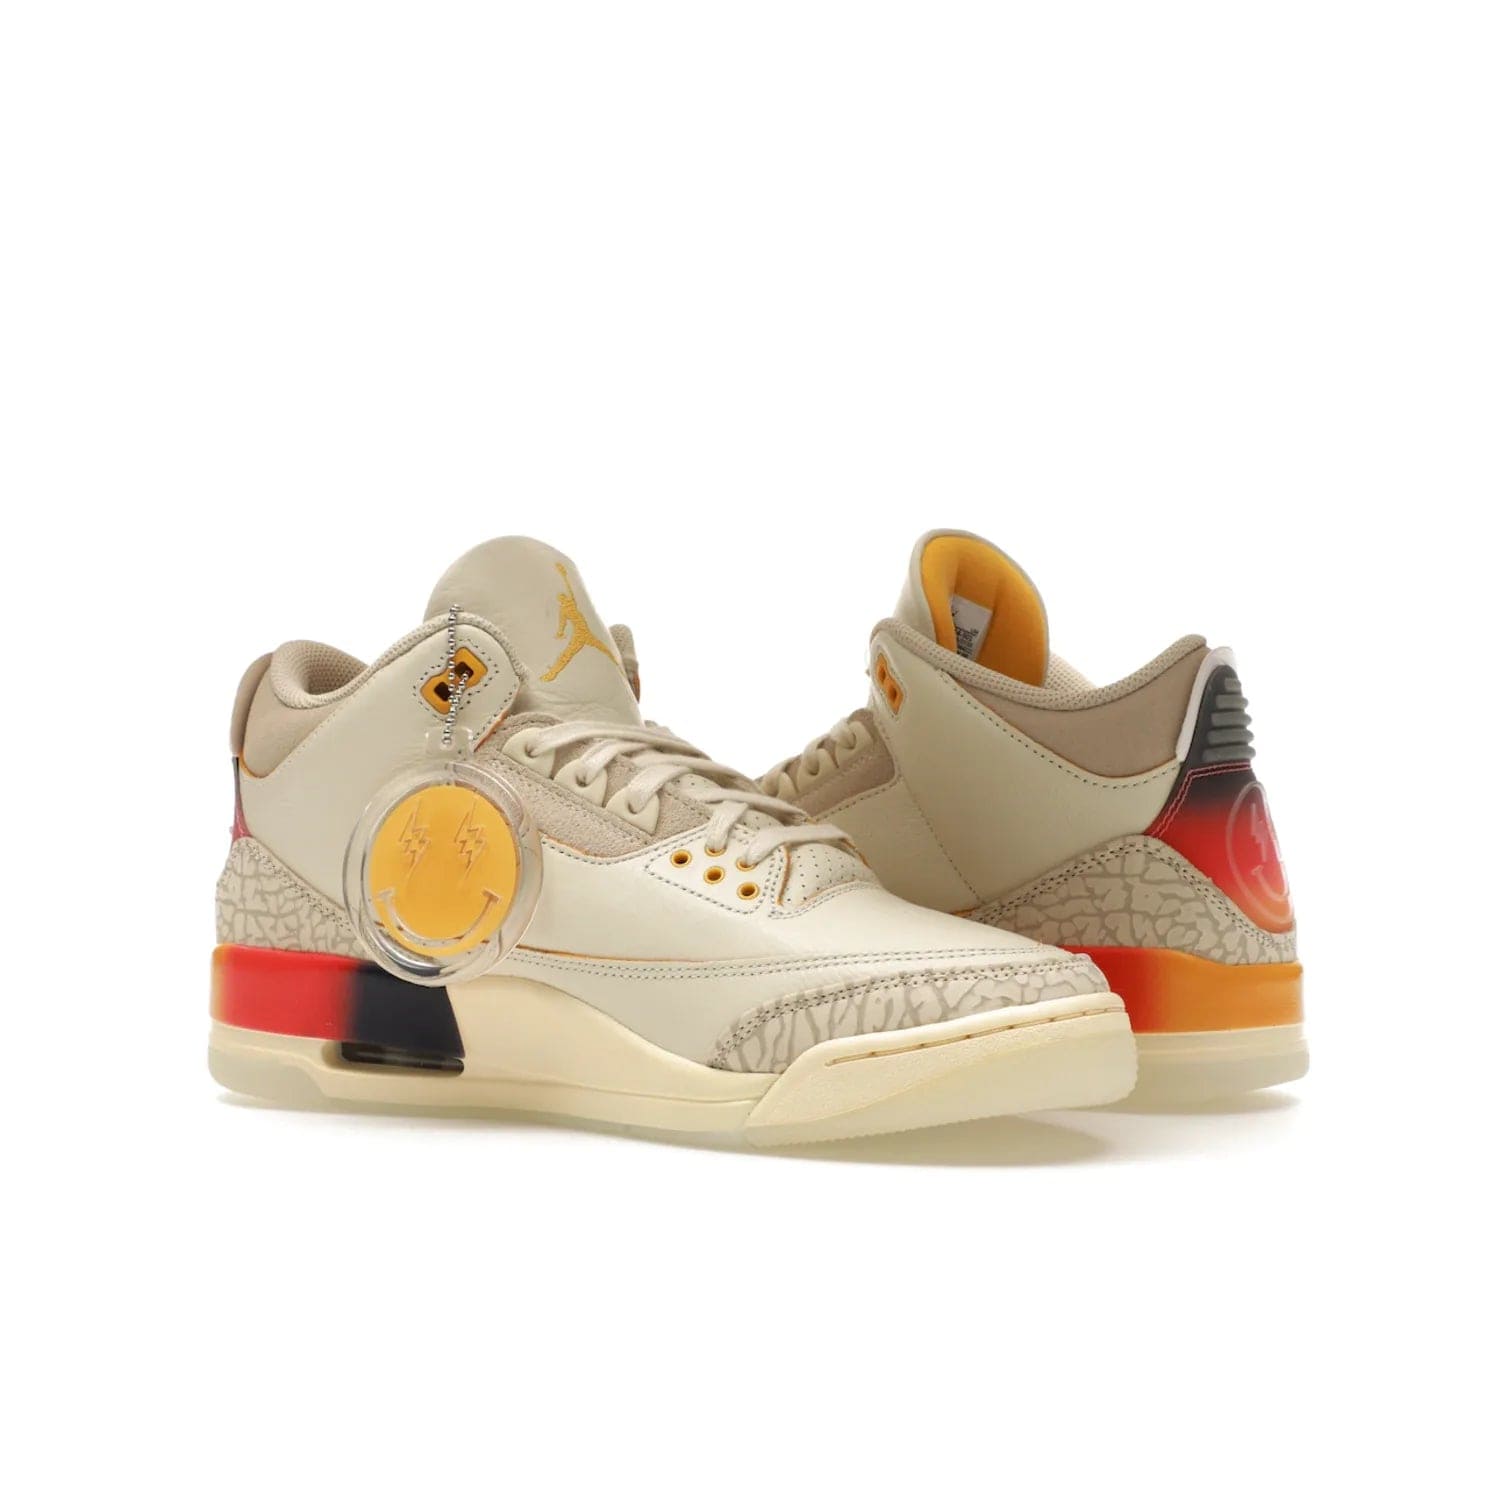 Jordan 3 Retro SP J Balvin Medellín Sunset - Image 22 - Only at www.BallersClubKickz.com - J Balvin x Jordan 3 Retro SP: Celebrate the joy of life with a colorful, homage to the electrifying reggaeton culture and iconic Jordan 3. Limited edition, Sept. 23. $250.